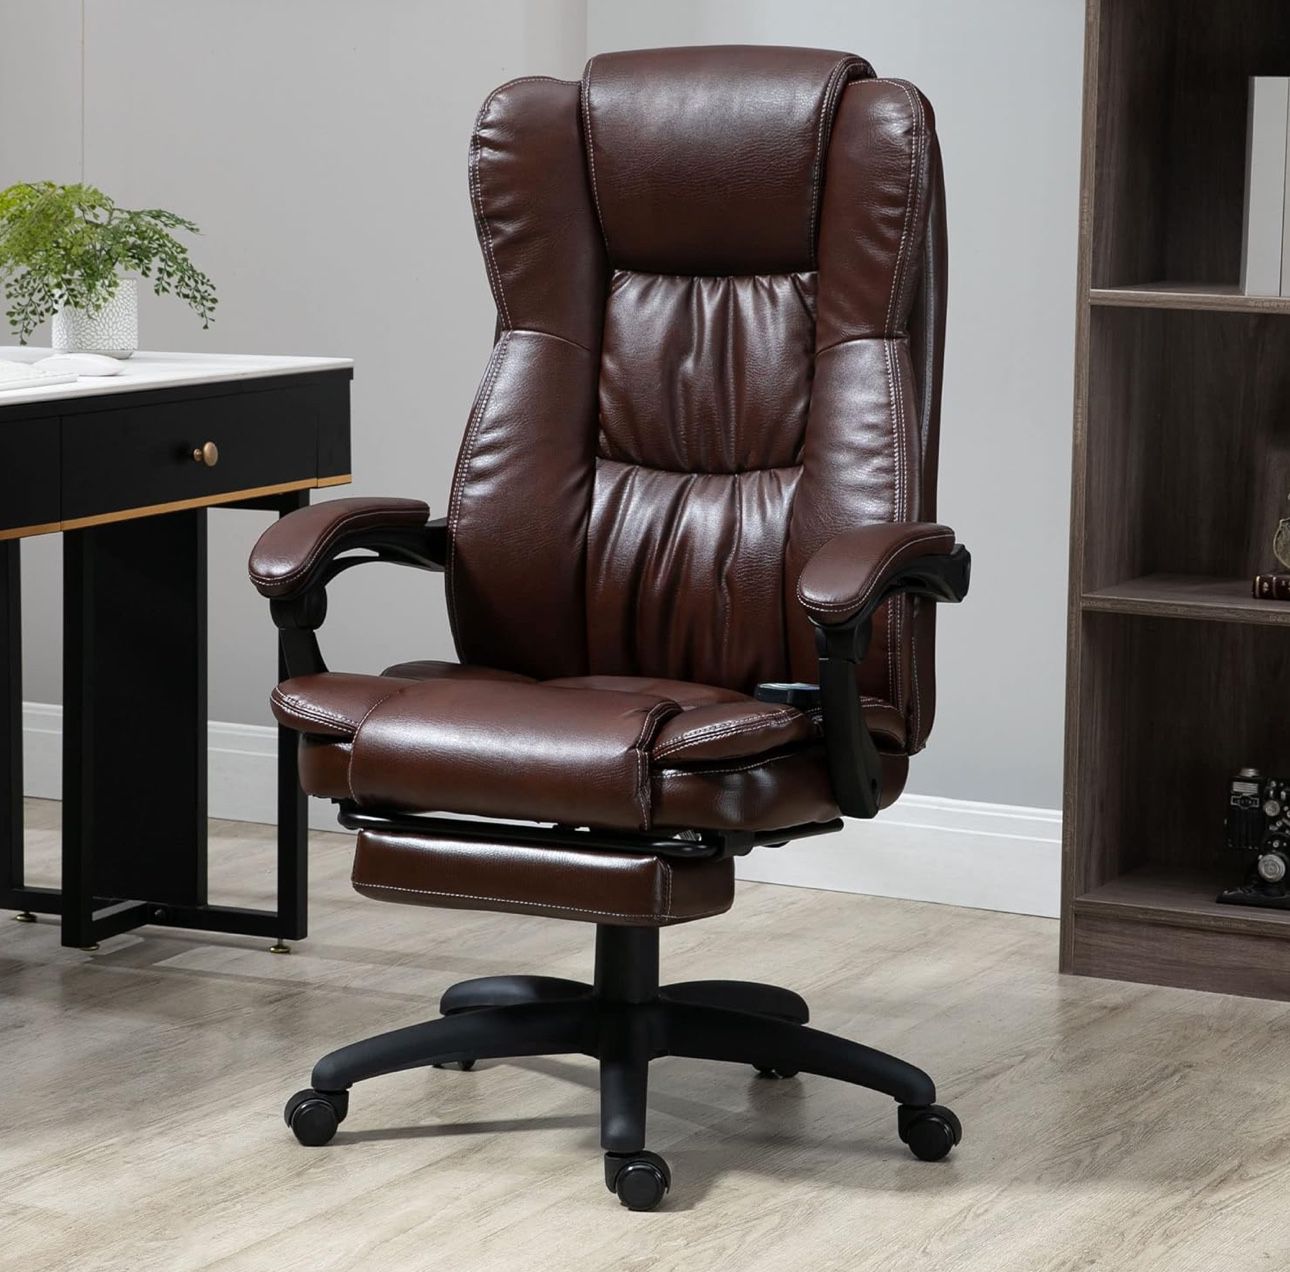 High Back Massage Office Chair with 6-Point Vibration,